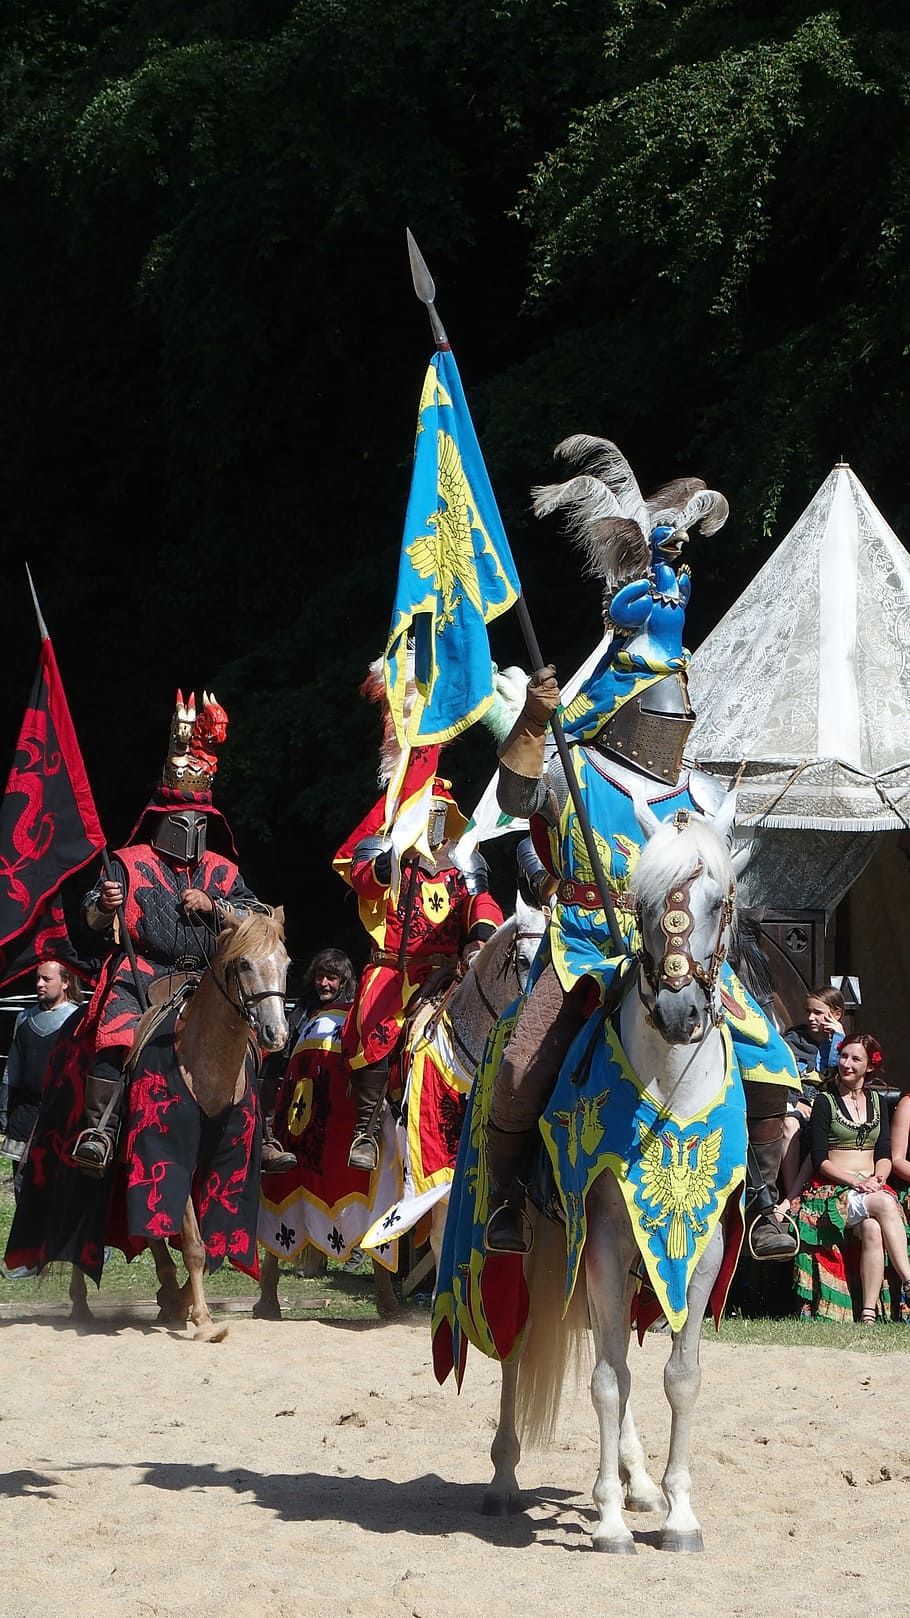 Knight, Middle Ages, Tournament, knights joust, armor, horses, traditional clothing, performing arts event, arts culture and entertainment, cultures